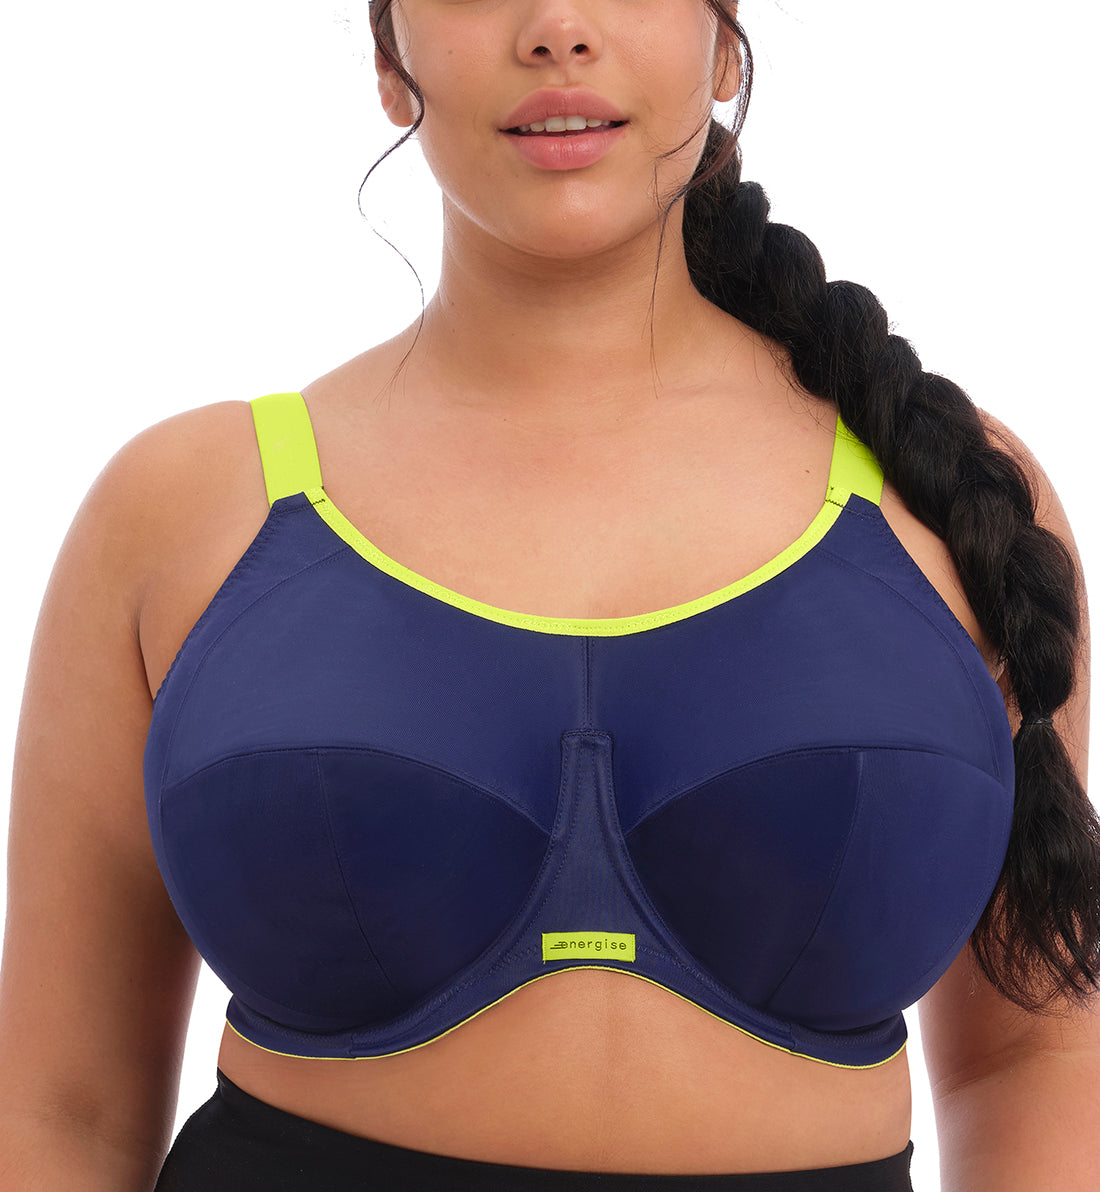 These Sports Bras Are Perfect For Larger Breasts